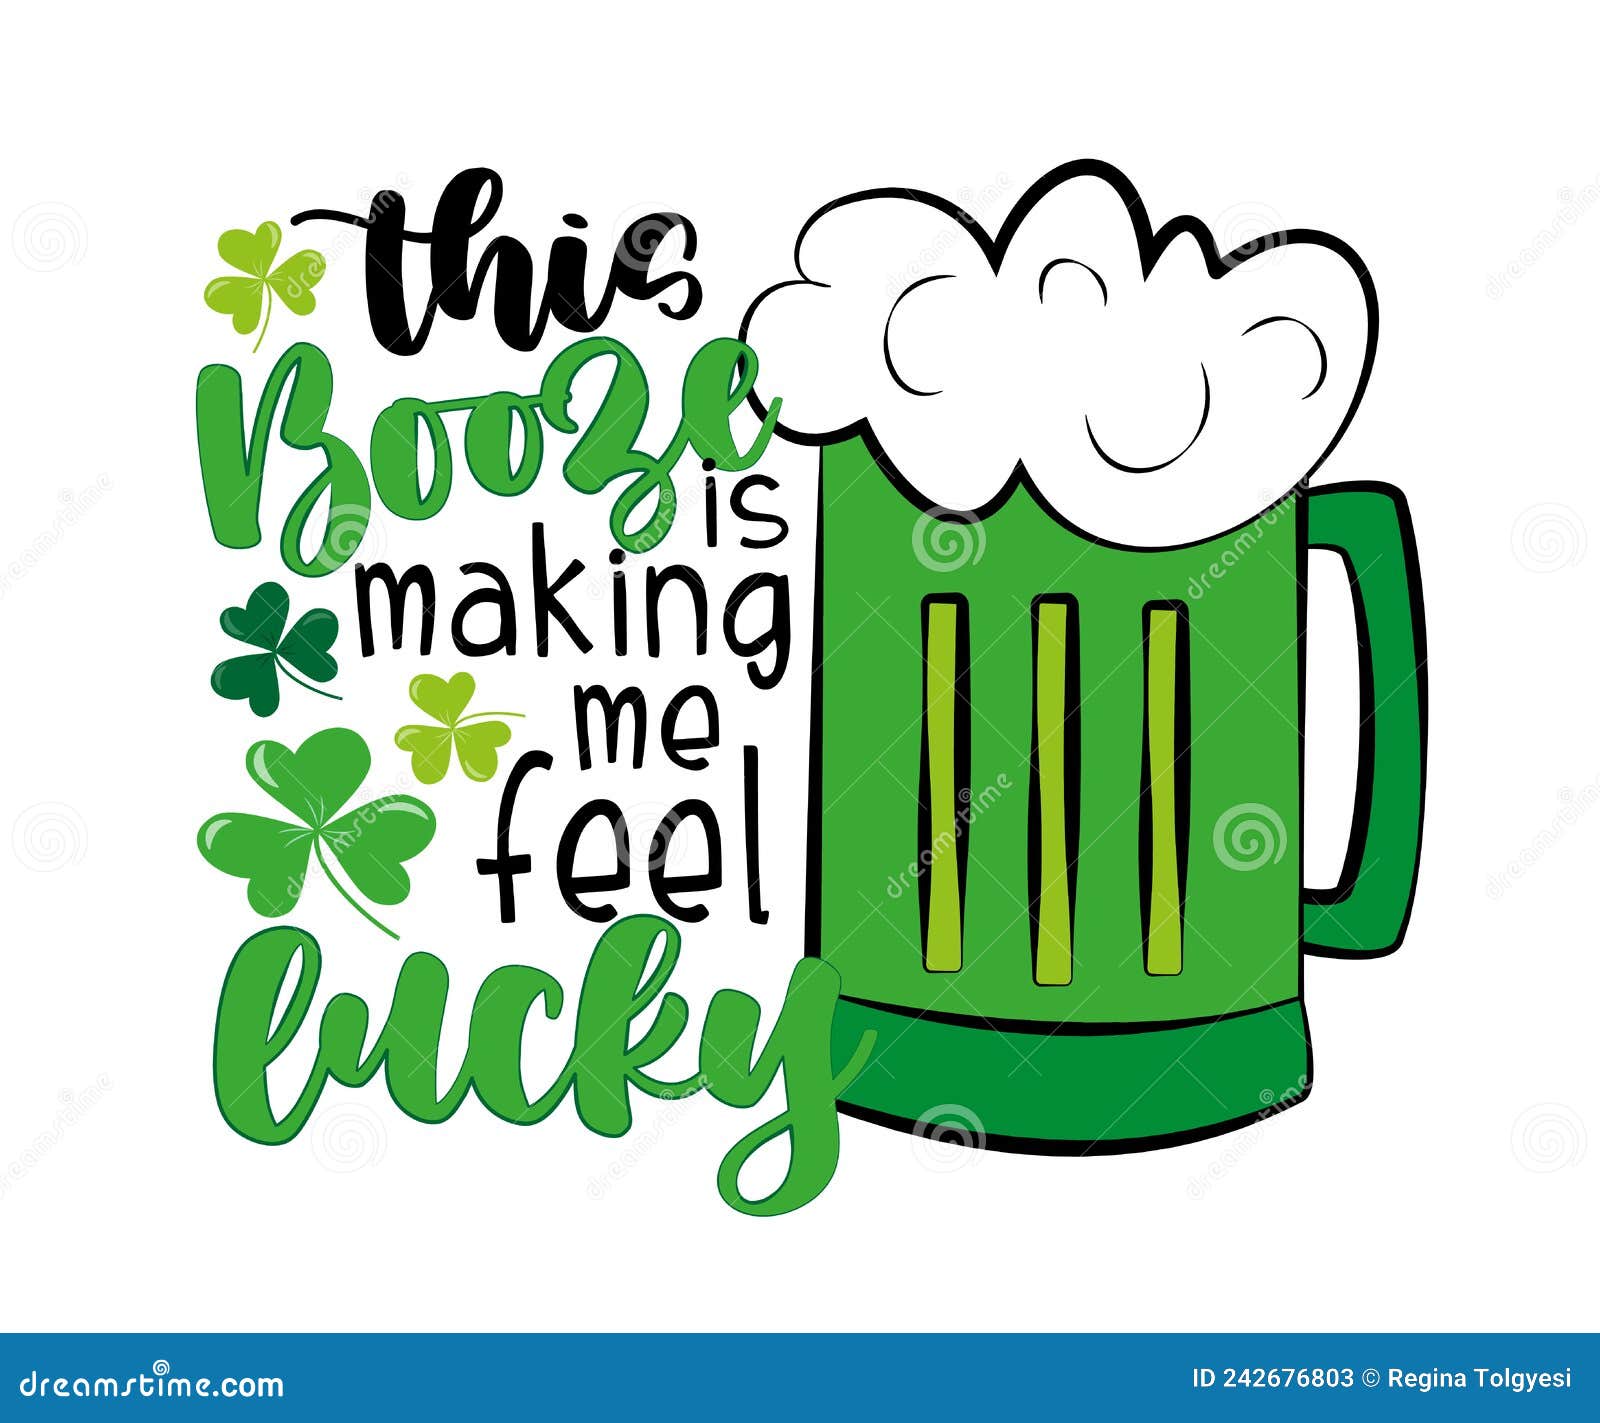 this booze is making me feel lucky - funny saying with beer mug for st. patrick`s day.